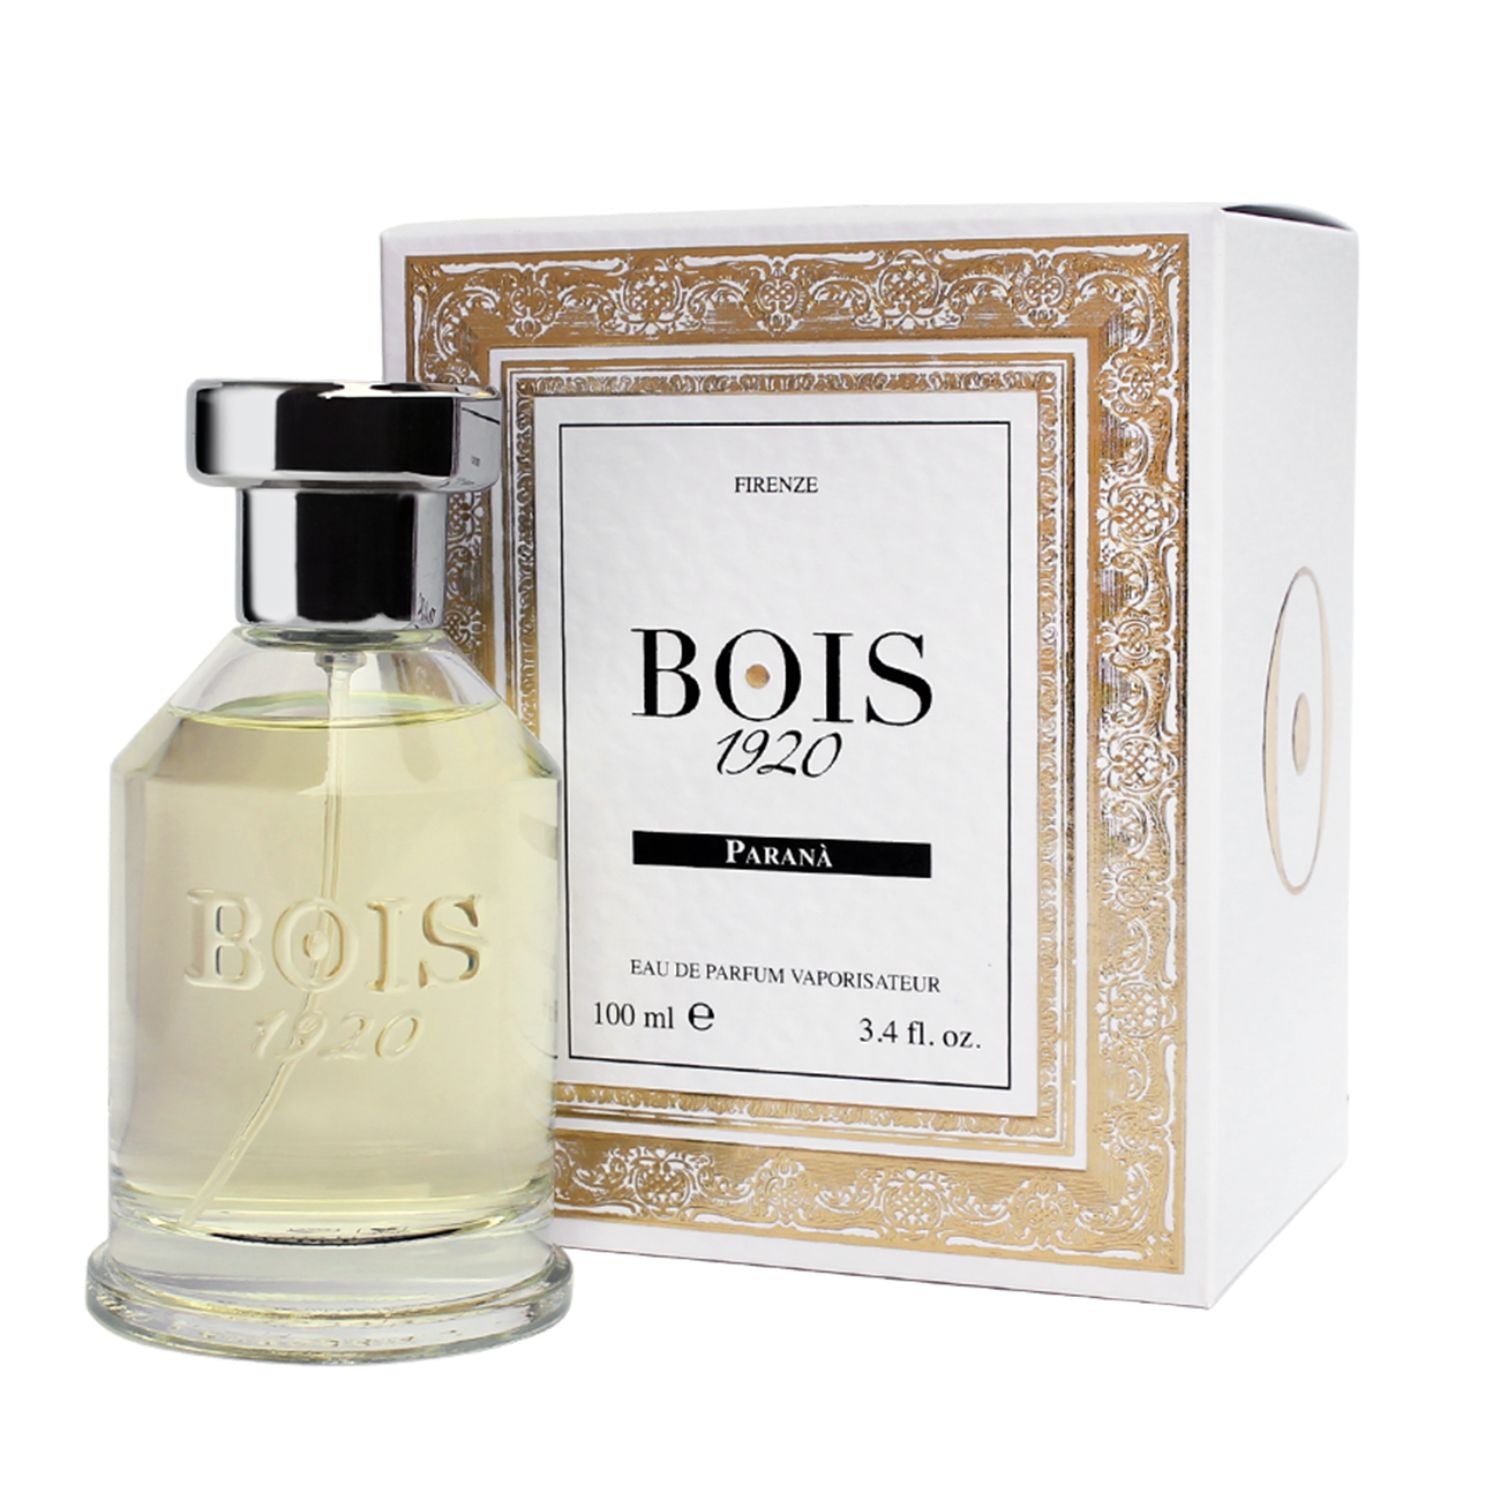 Bois 1920 – Parana, A Woody Fragrance For Women And Mena Lavishing Scent Composed By Divine Notes Of Bergamot, Fruity Black Currant, And Cardamoma Heart Of Sensual Jasmine And Rose, A Sophisticated Floral Bouquetthe Unique Perfume Ends With Exquisite Accords Of Patchouli, White Musk And Amber.Parana, A Precious Essence, A Gift To Your Senses.Top Notes: Bergamot, Black Currant And Cardamom; Heart Notes: Birch, Jasmine And Rose; Base Notes: Oakmoss, Patchouli, White Musk And Amber.